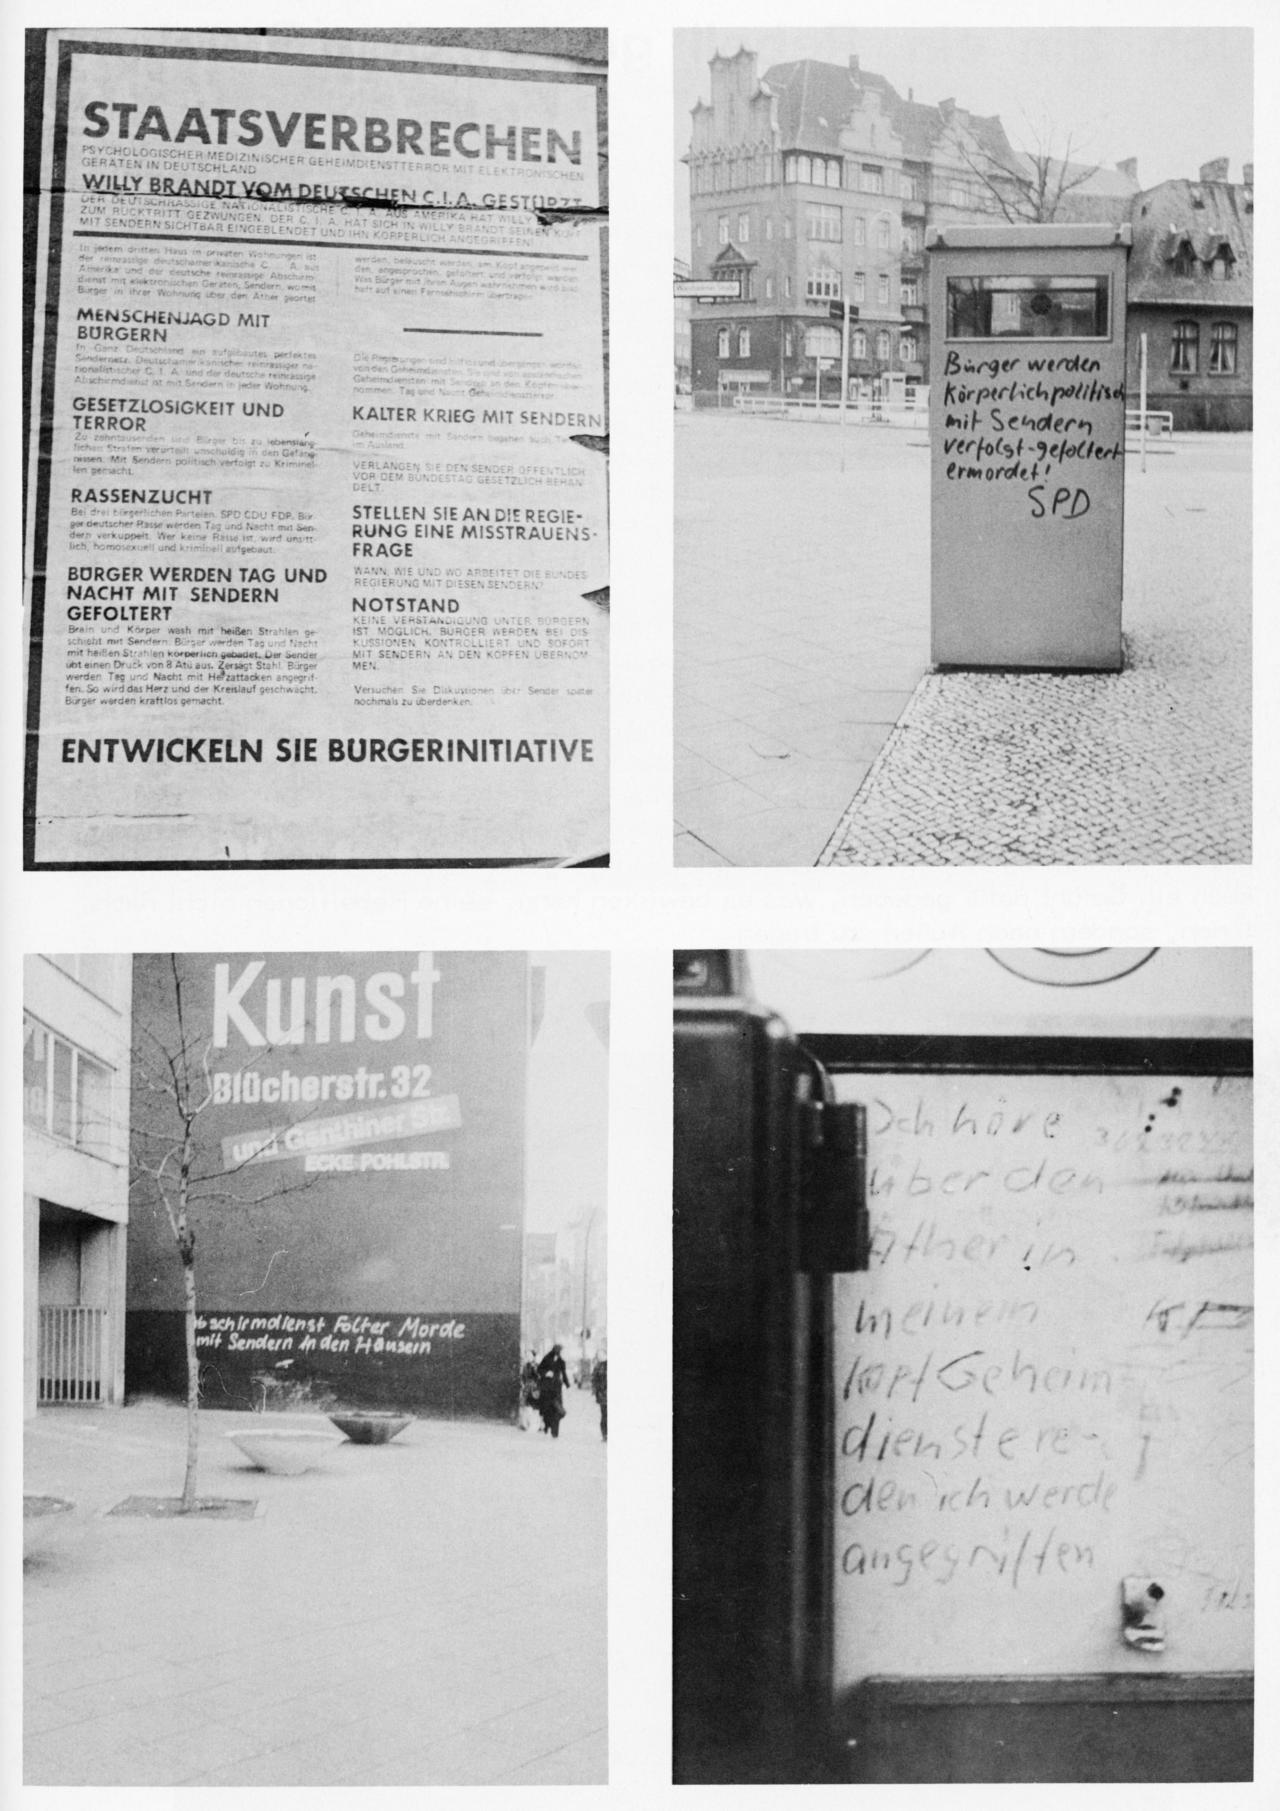 Four photos with Grafittis of the so-called »transmitter man«